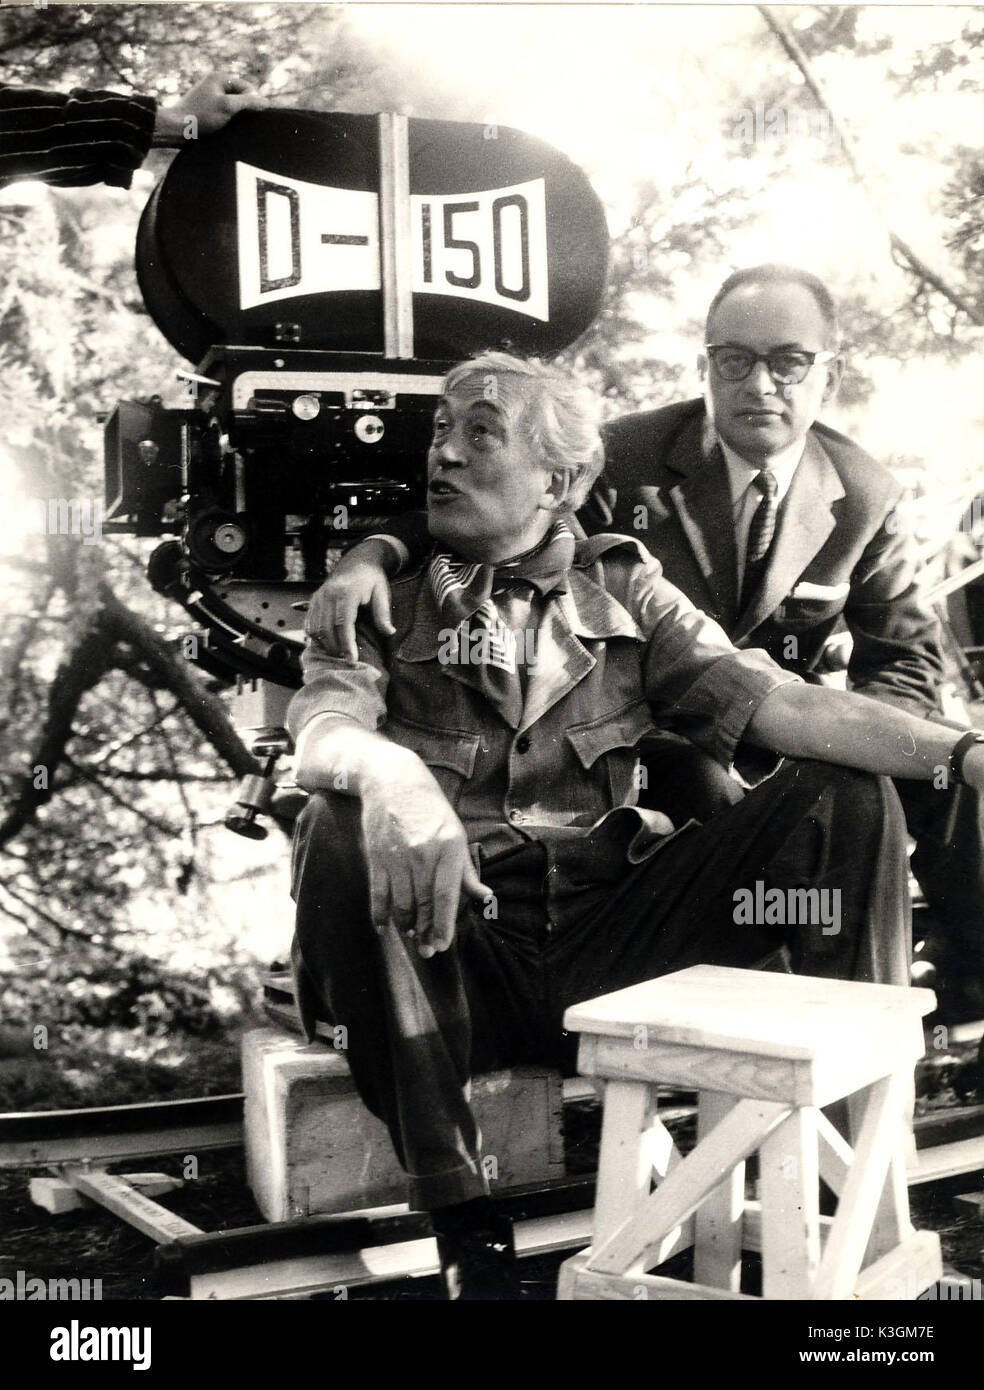 Director JOHN HUSTON and producer DINO DE LAURENTIIS in front of the D-150 camera between takes of THE BIBLE . This was the first film shot in the D-150 wide film process. THE BIBLE [US / IT 1966] Director JOHN HUSTON [centre] and Producer DINO DE LAURENTIIS in front of the D-150 camera between takes. This was the first film shot in the D-150 wide film process. Stock Photo